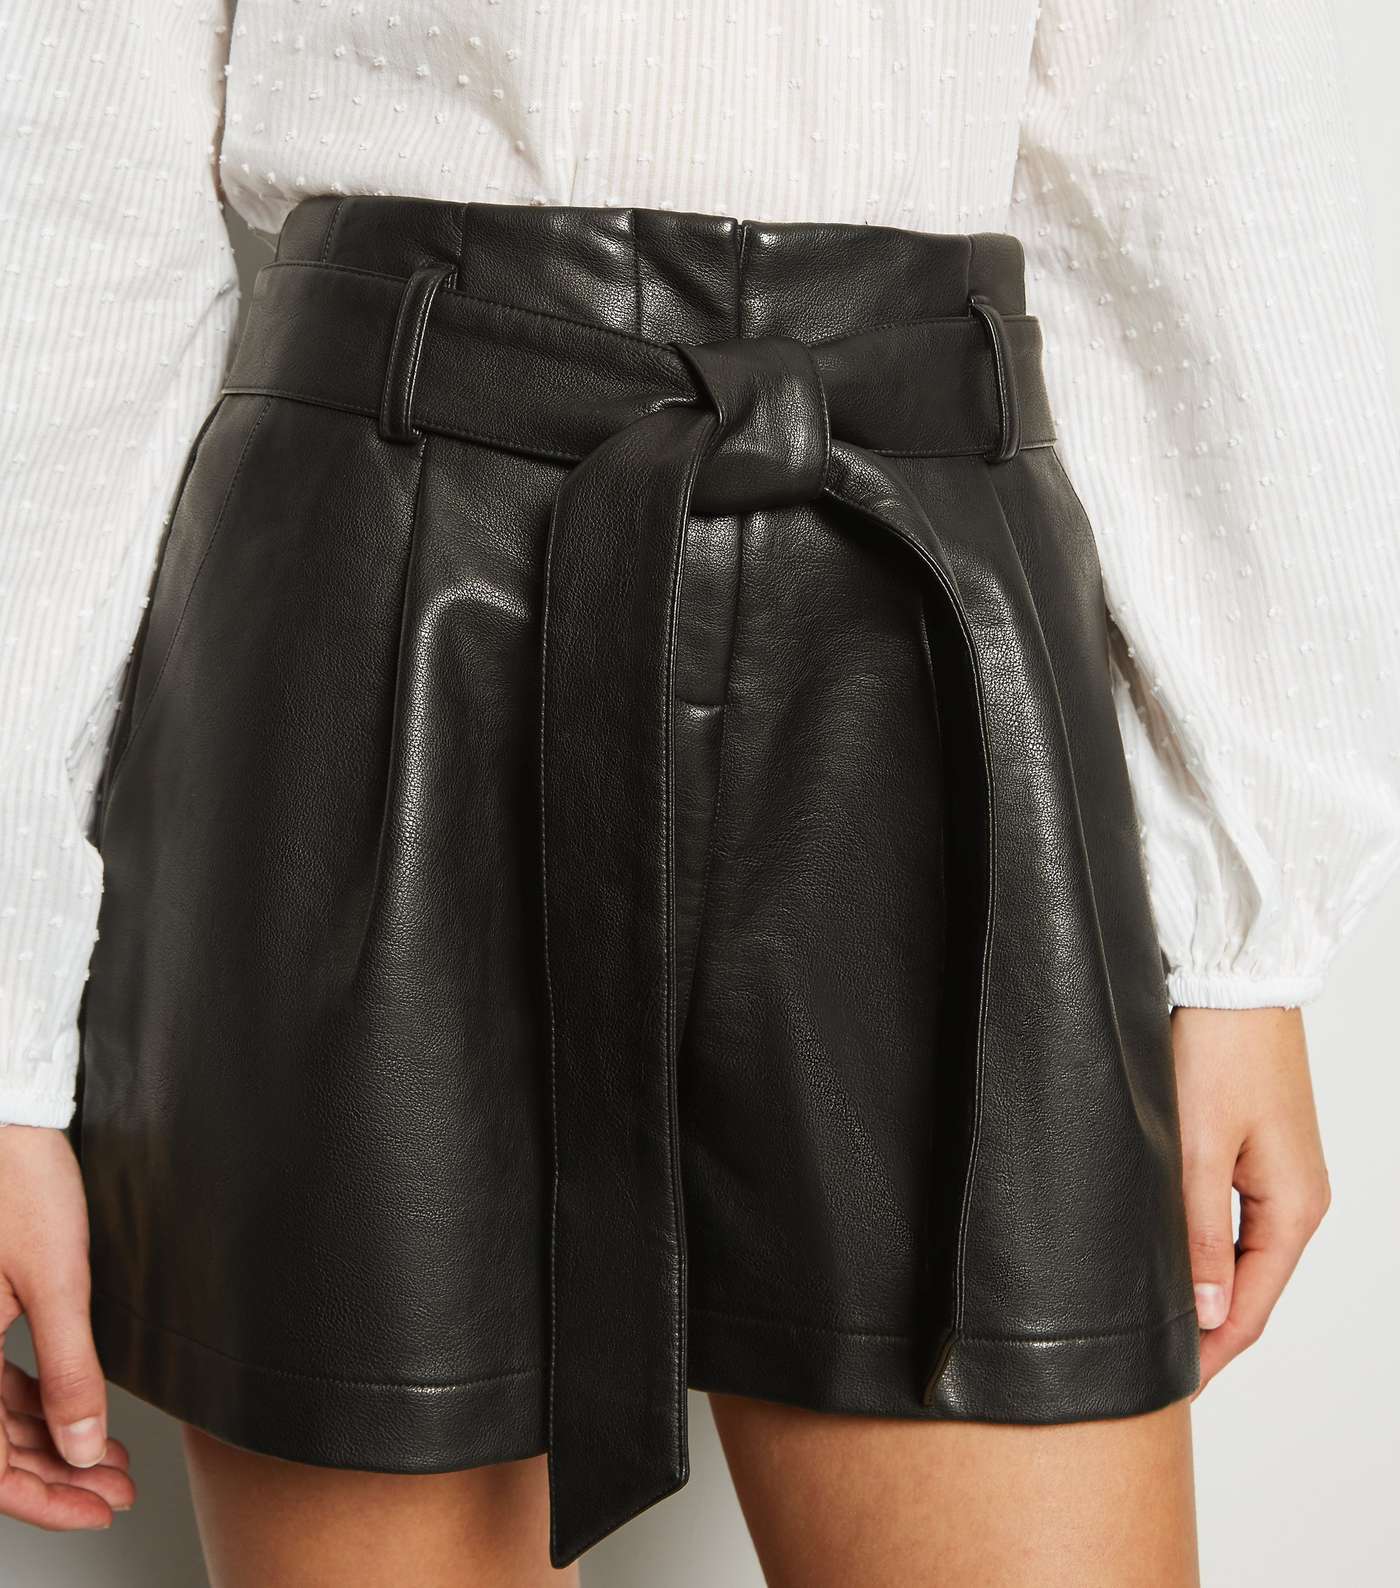 Black Leather-Look High Waist Shorts Image 5